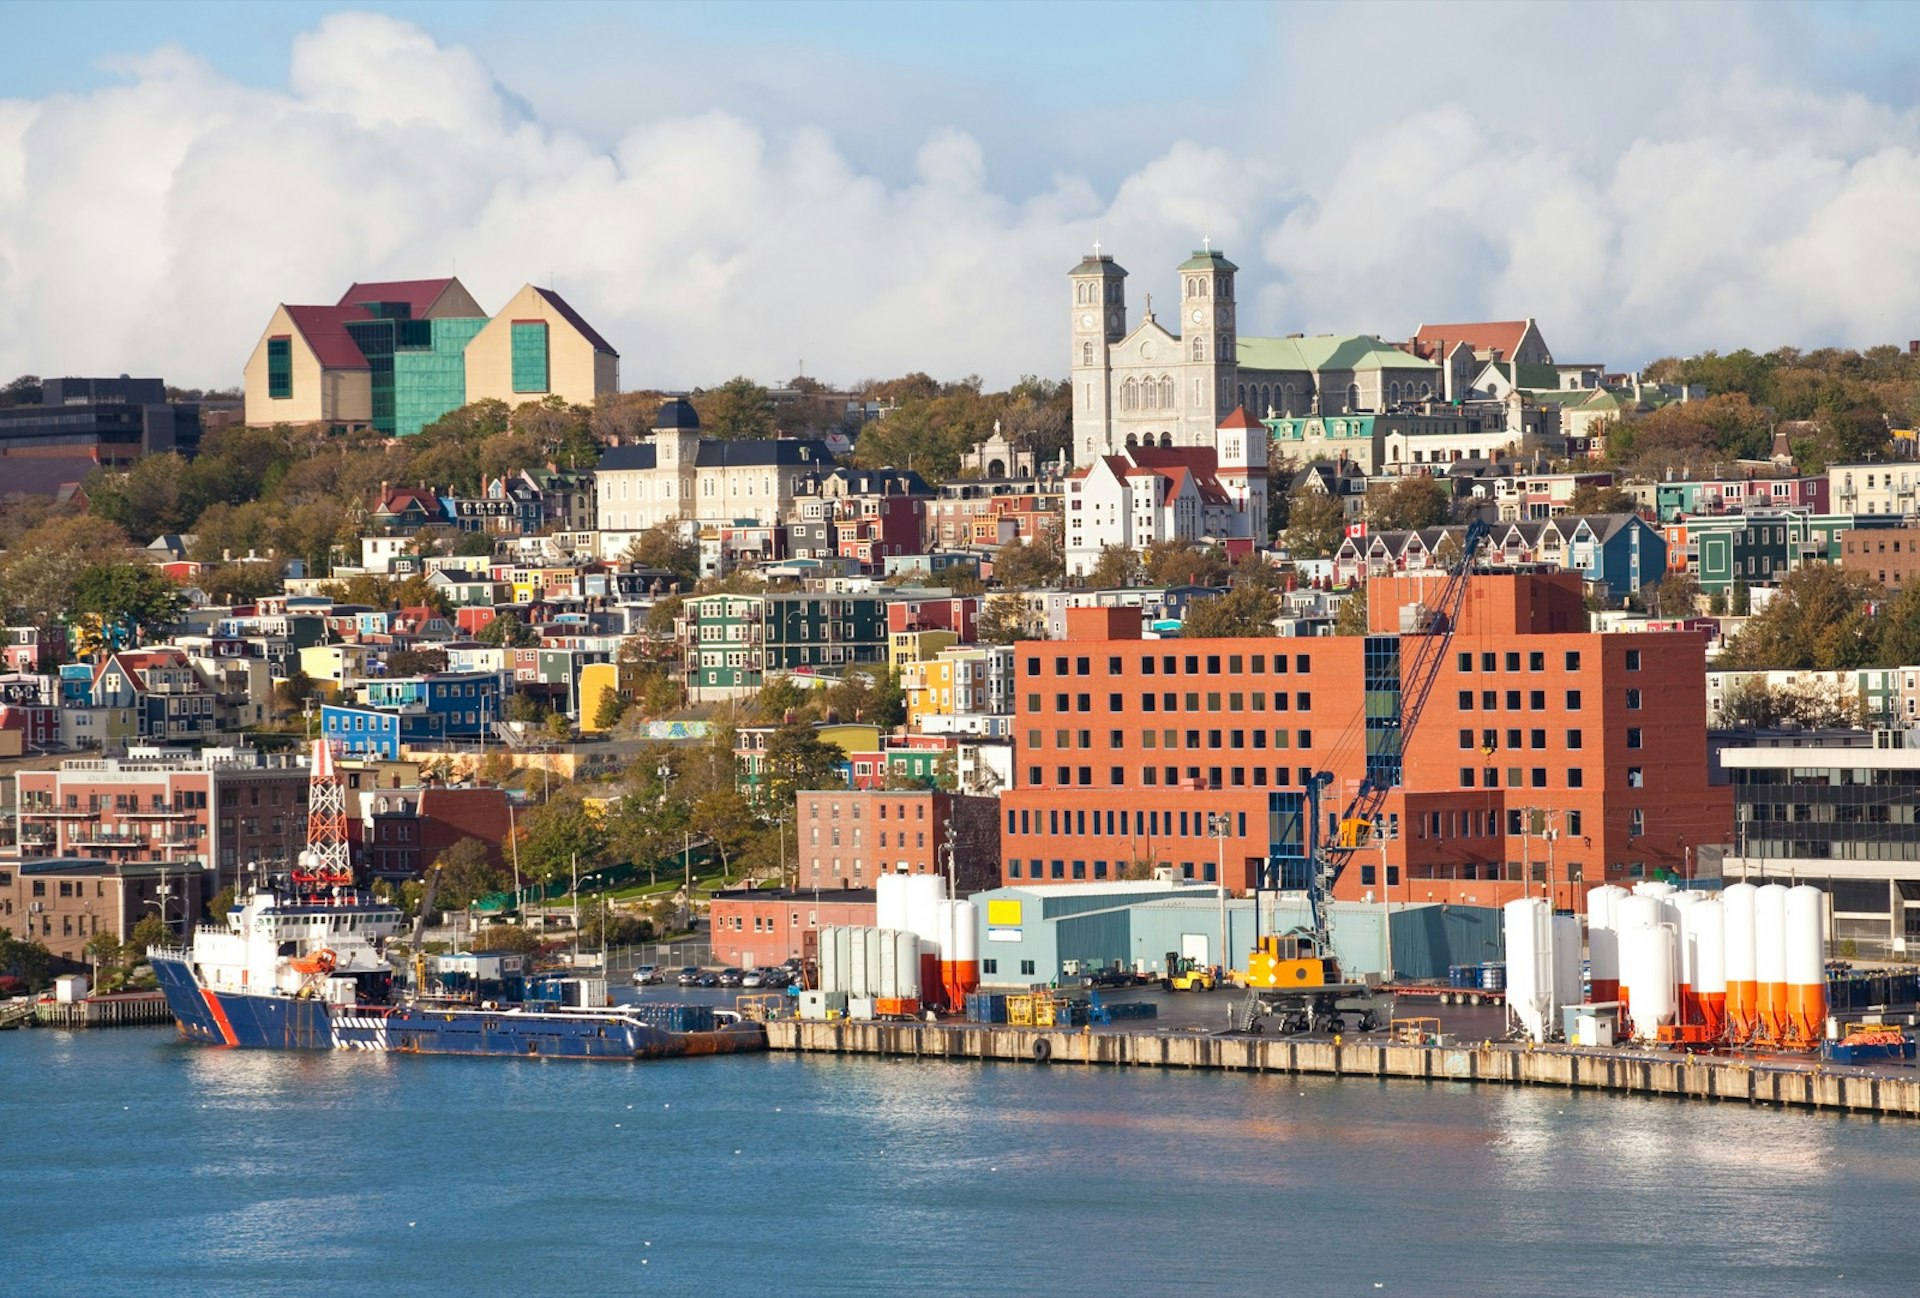 Colorful buildings mark the shore of St. John's Harbour in Newfoundland, Canada on a sunny day.